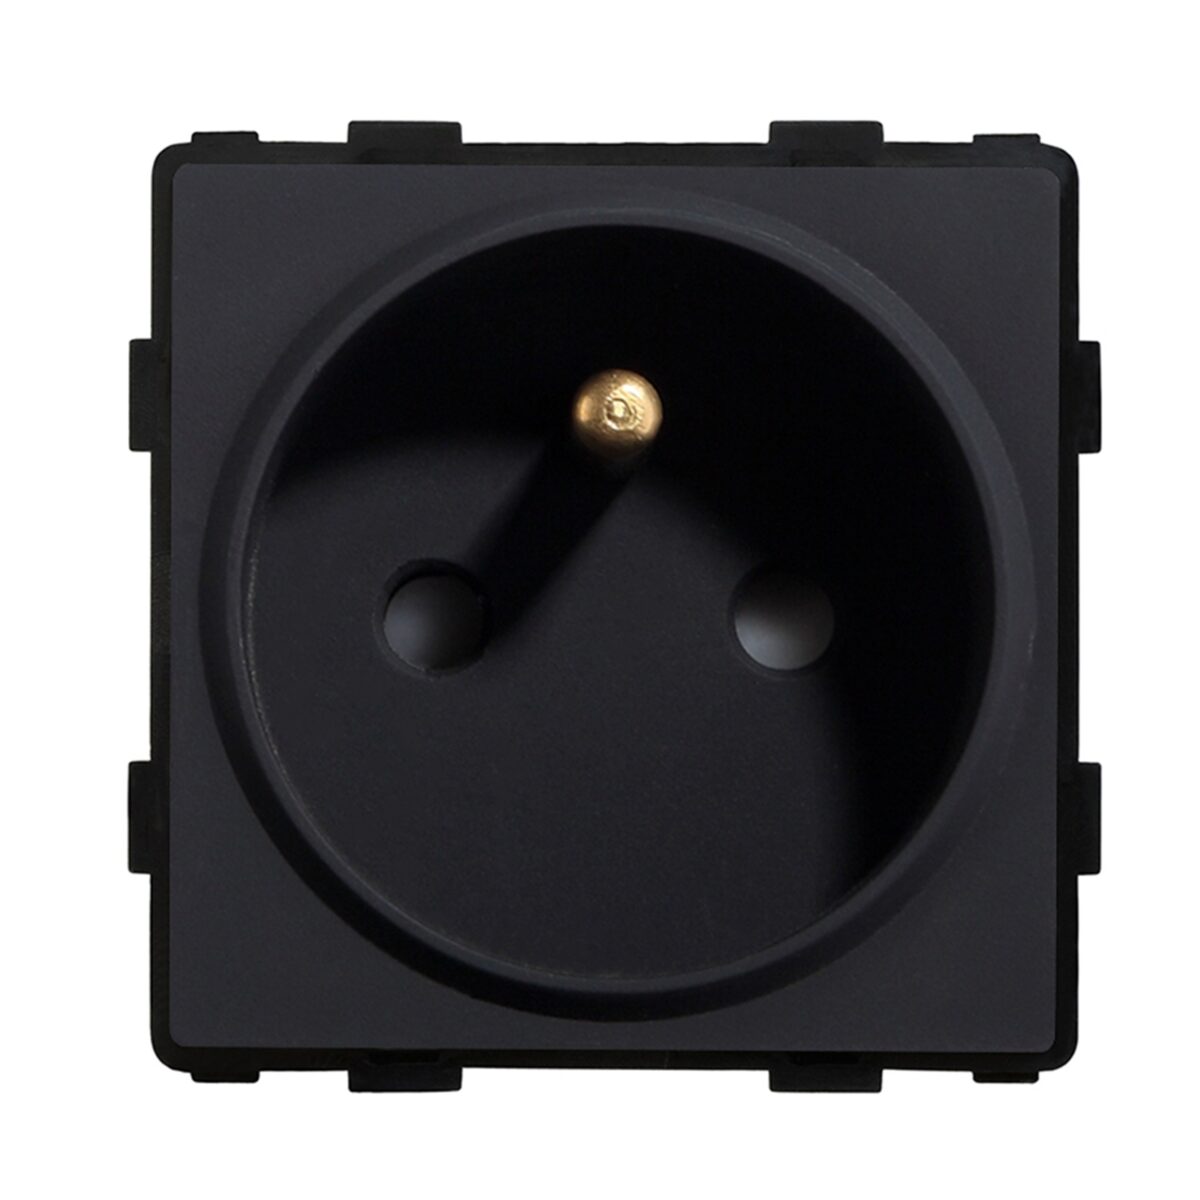 Bseed-eu-uk-russia-standard-socket-panel-button-switch-with-crystal-glass-frame-black-diy-home-3